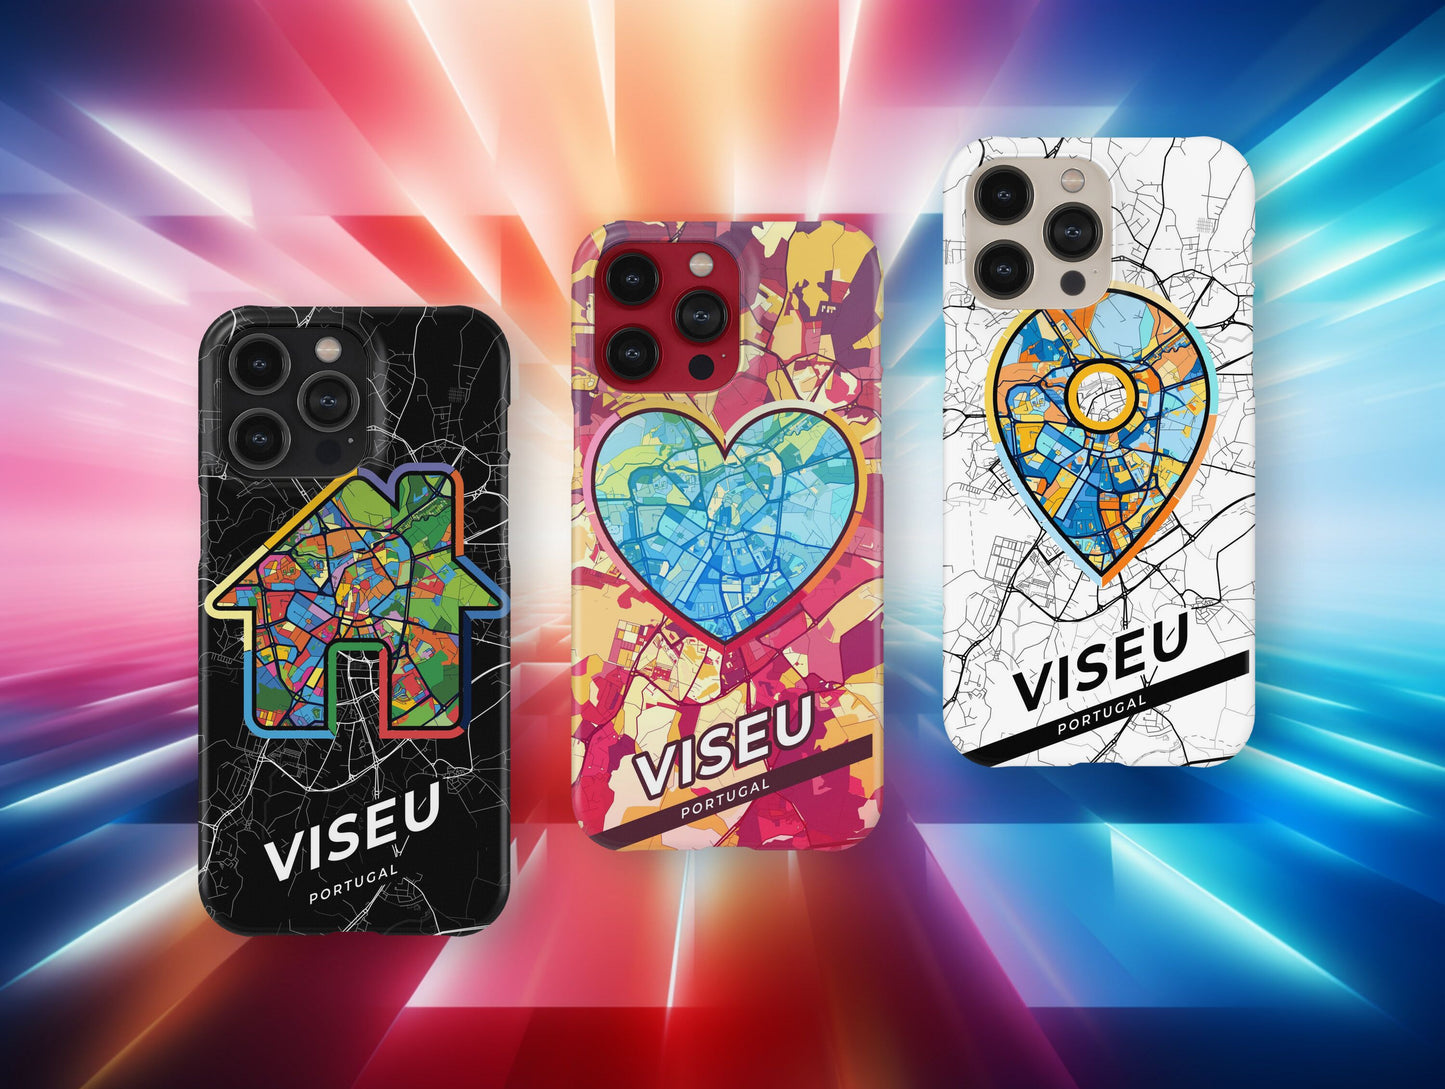 Viseu Portugal slim phone case with colorful icon